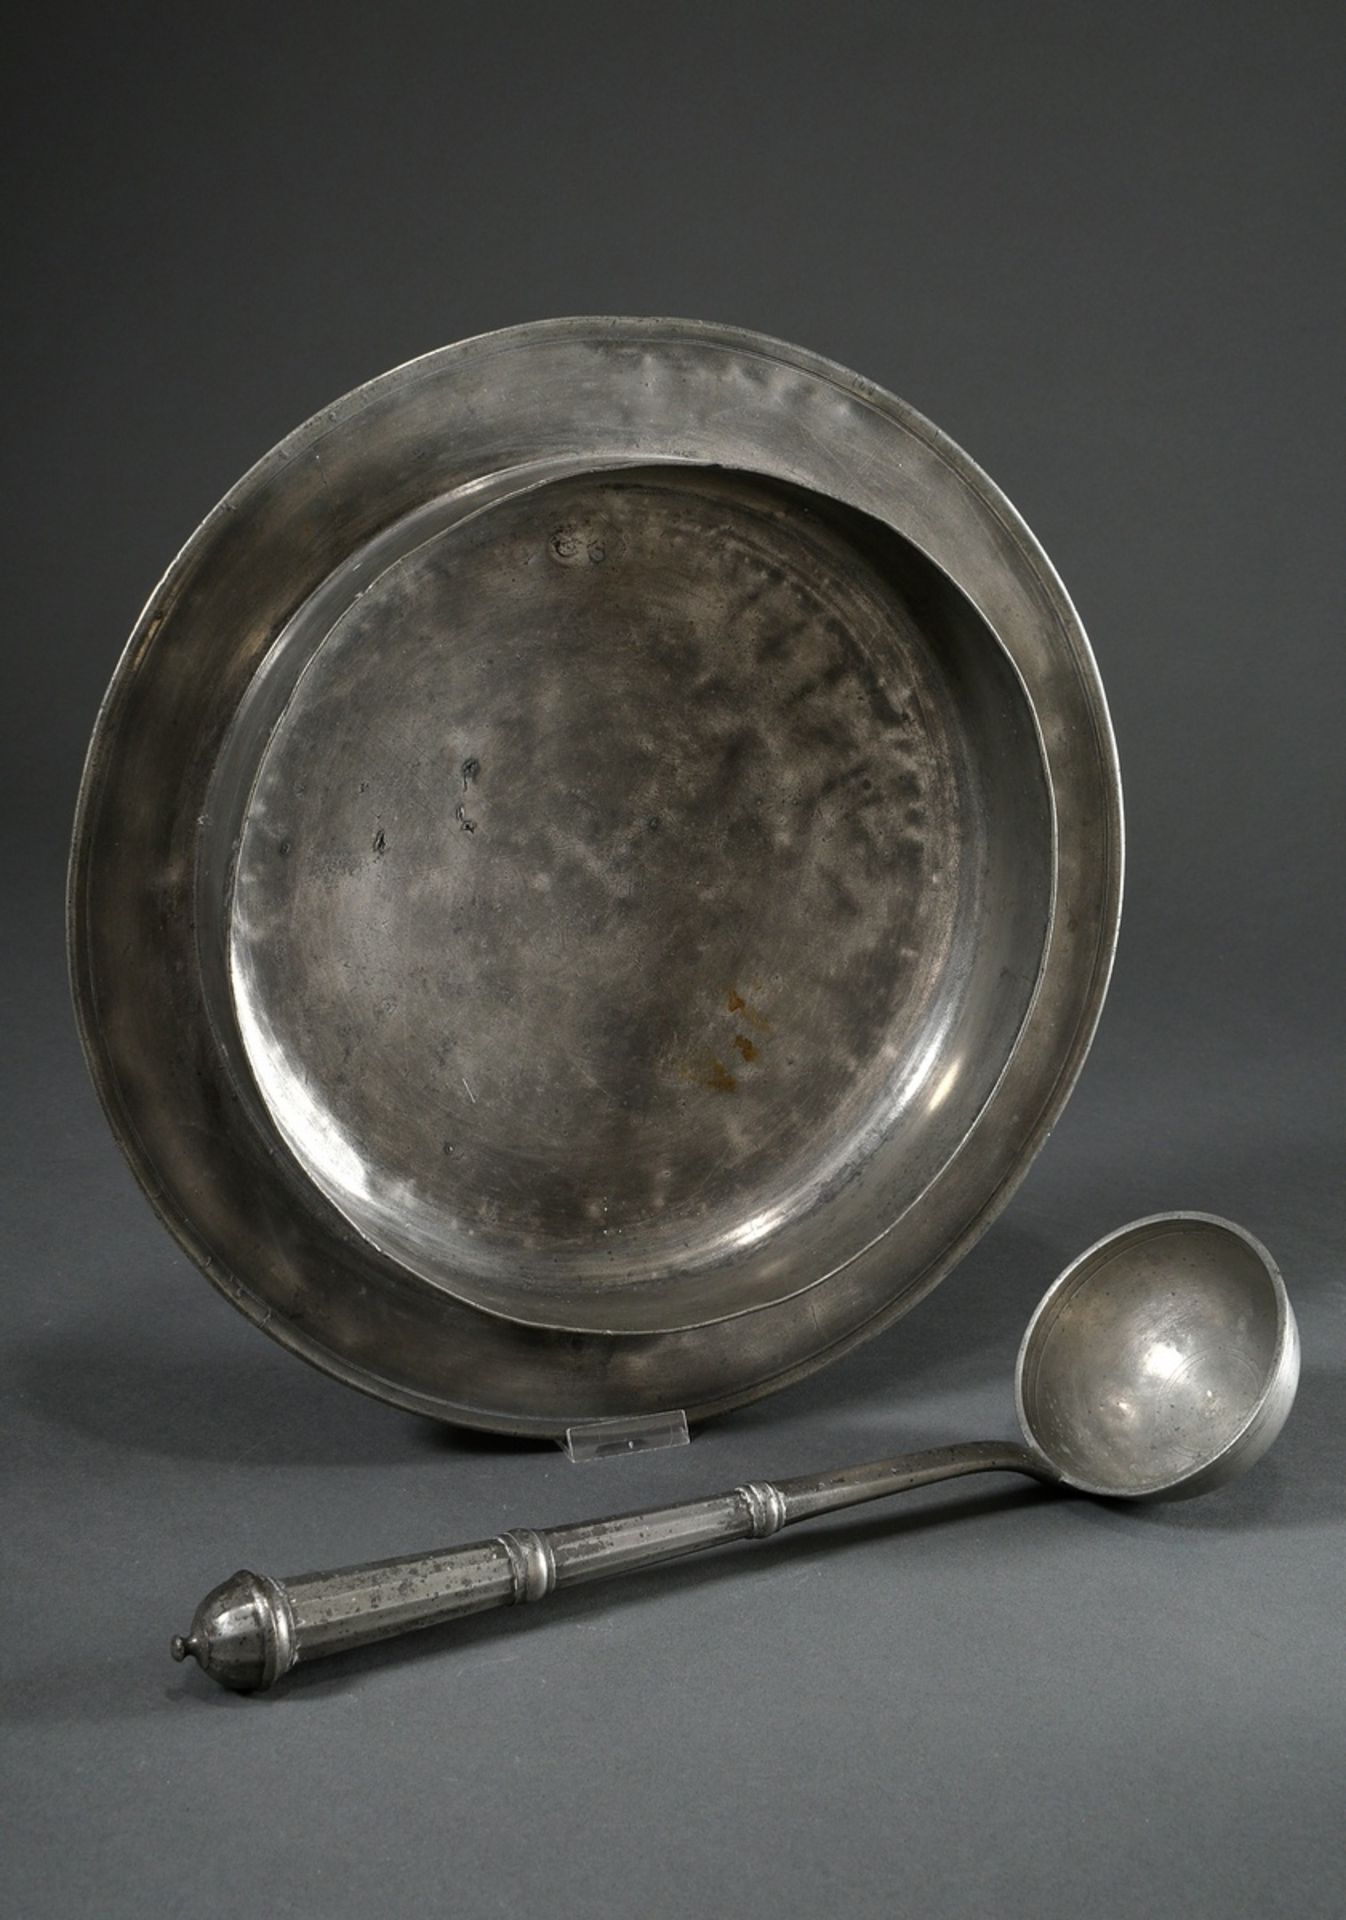 Large Lübeck pewter plate with a striped rim (Ø 36cm), on the reverse with engraved owner's mark "J